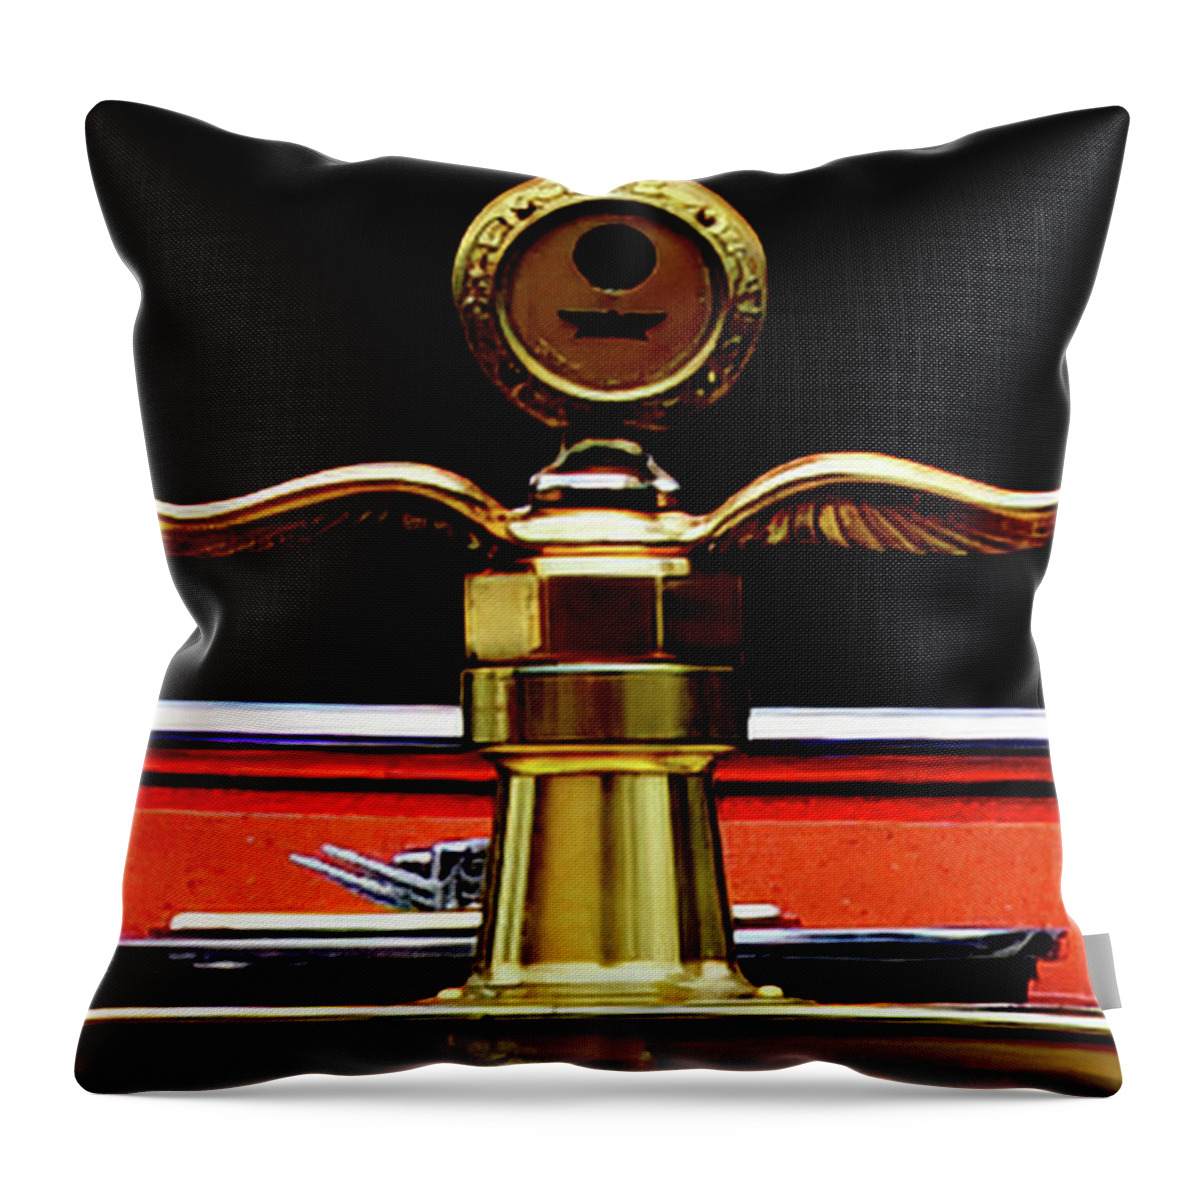 Hood Ornament Throw Pillow featuring the photograph Classic Hood Ornament by Cathy Anderson